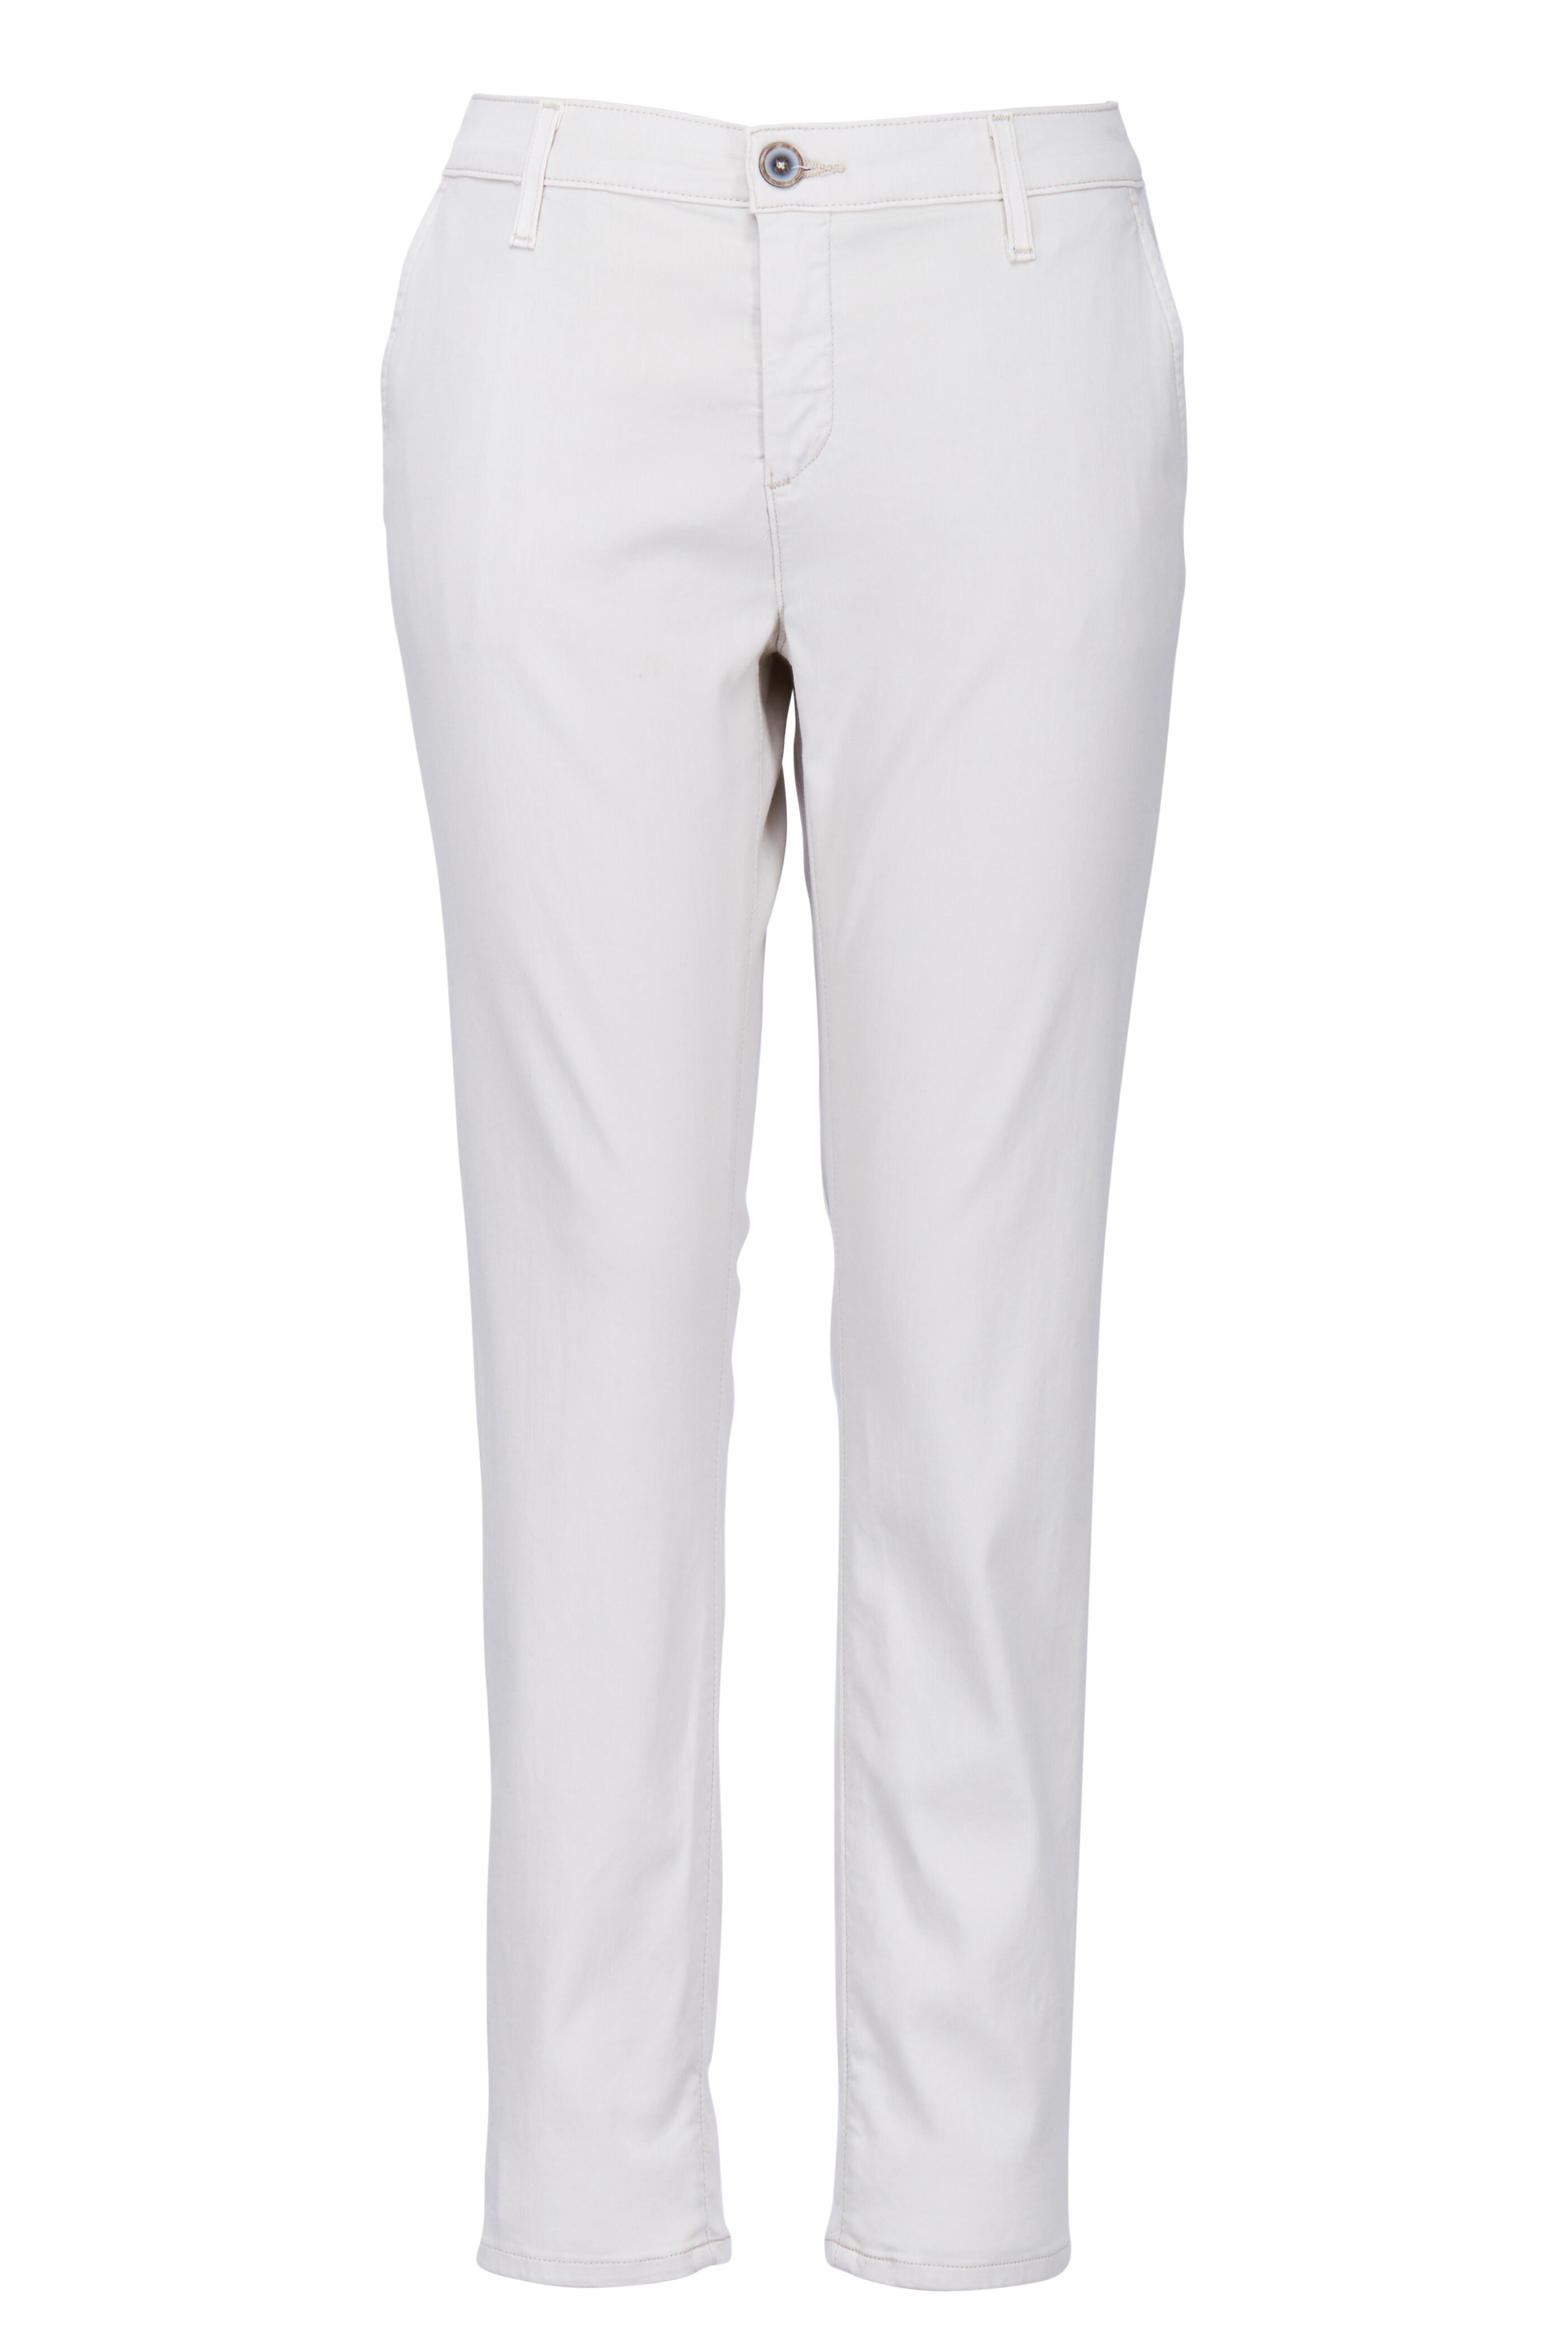 AG - The Tristan Sand Stretch Twill Tailored Trouser